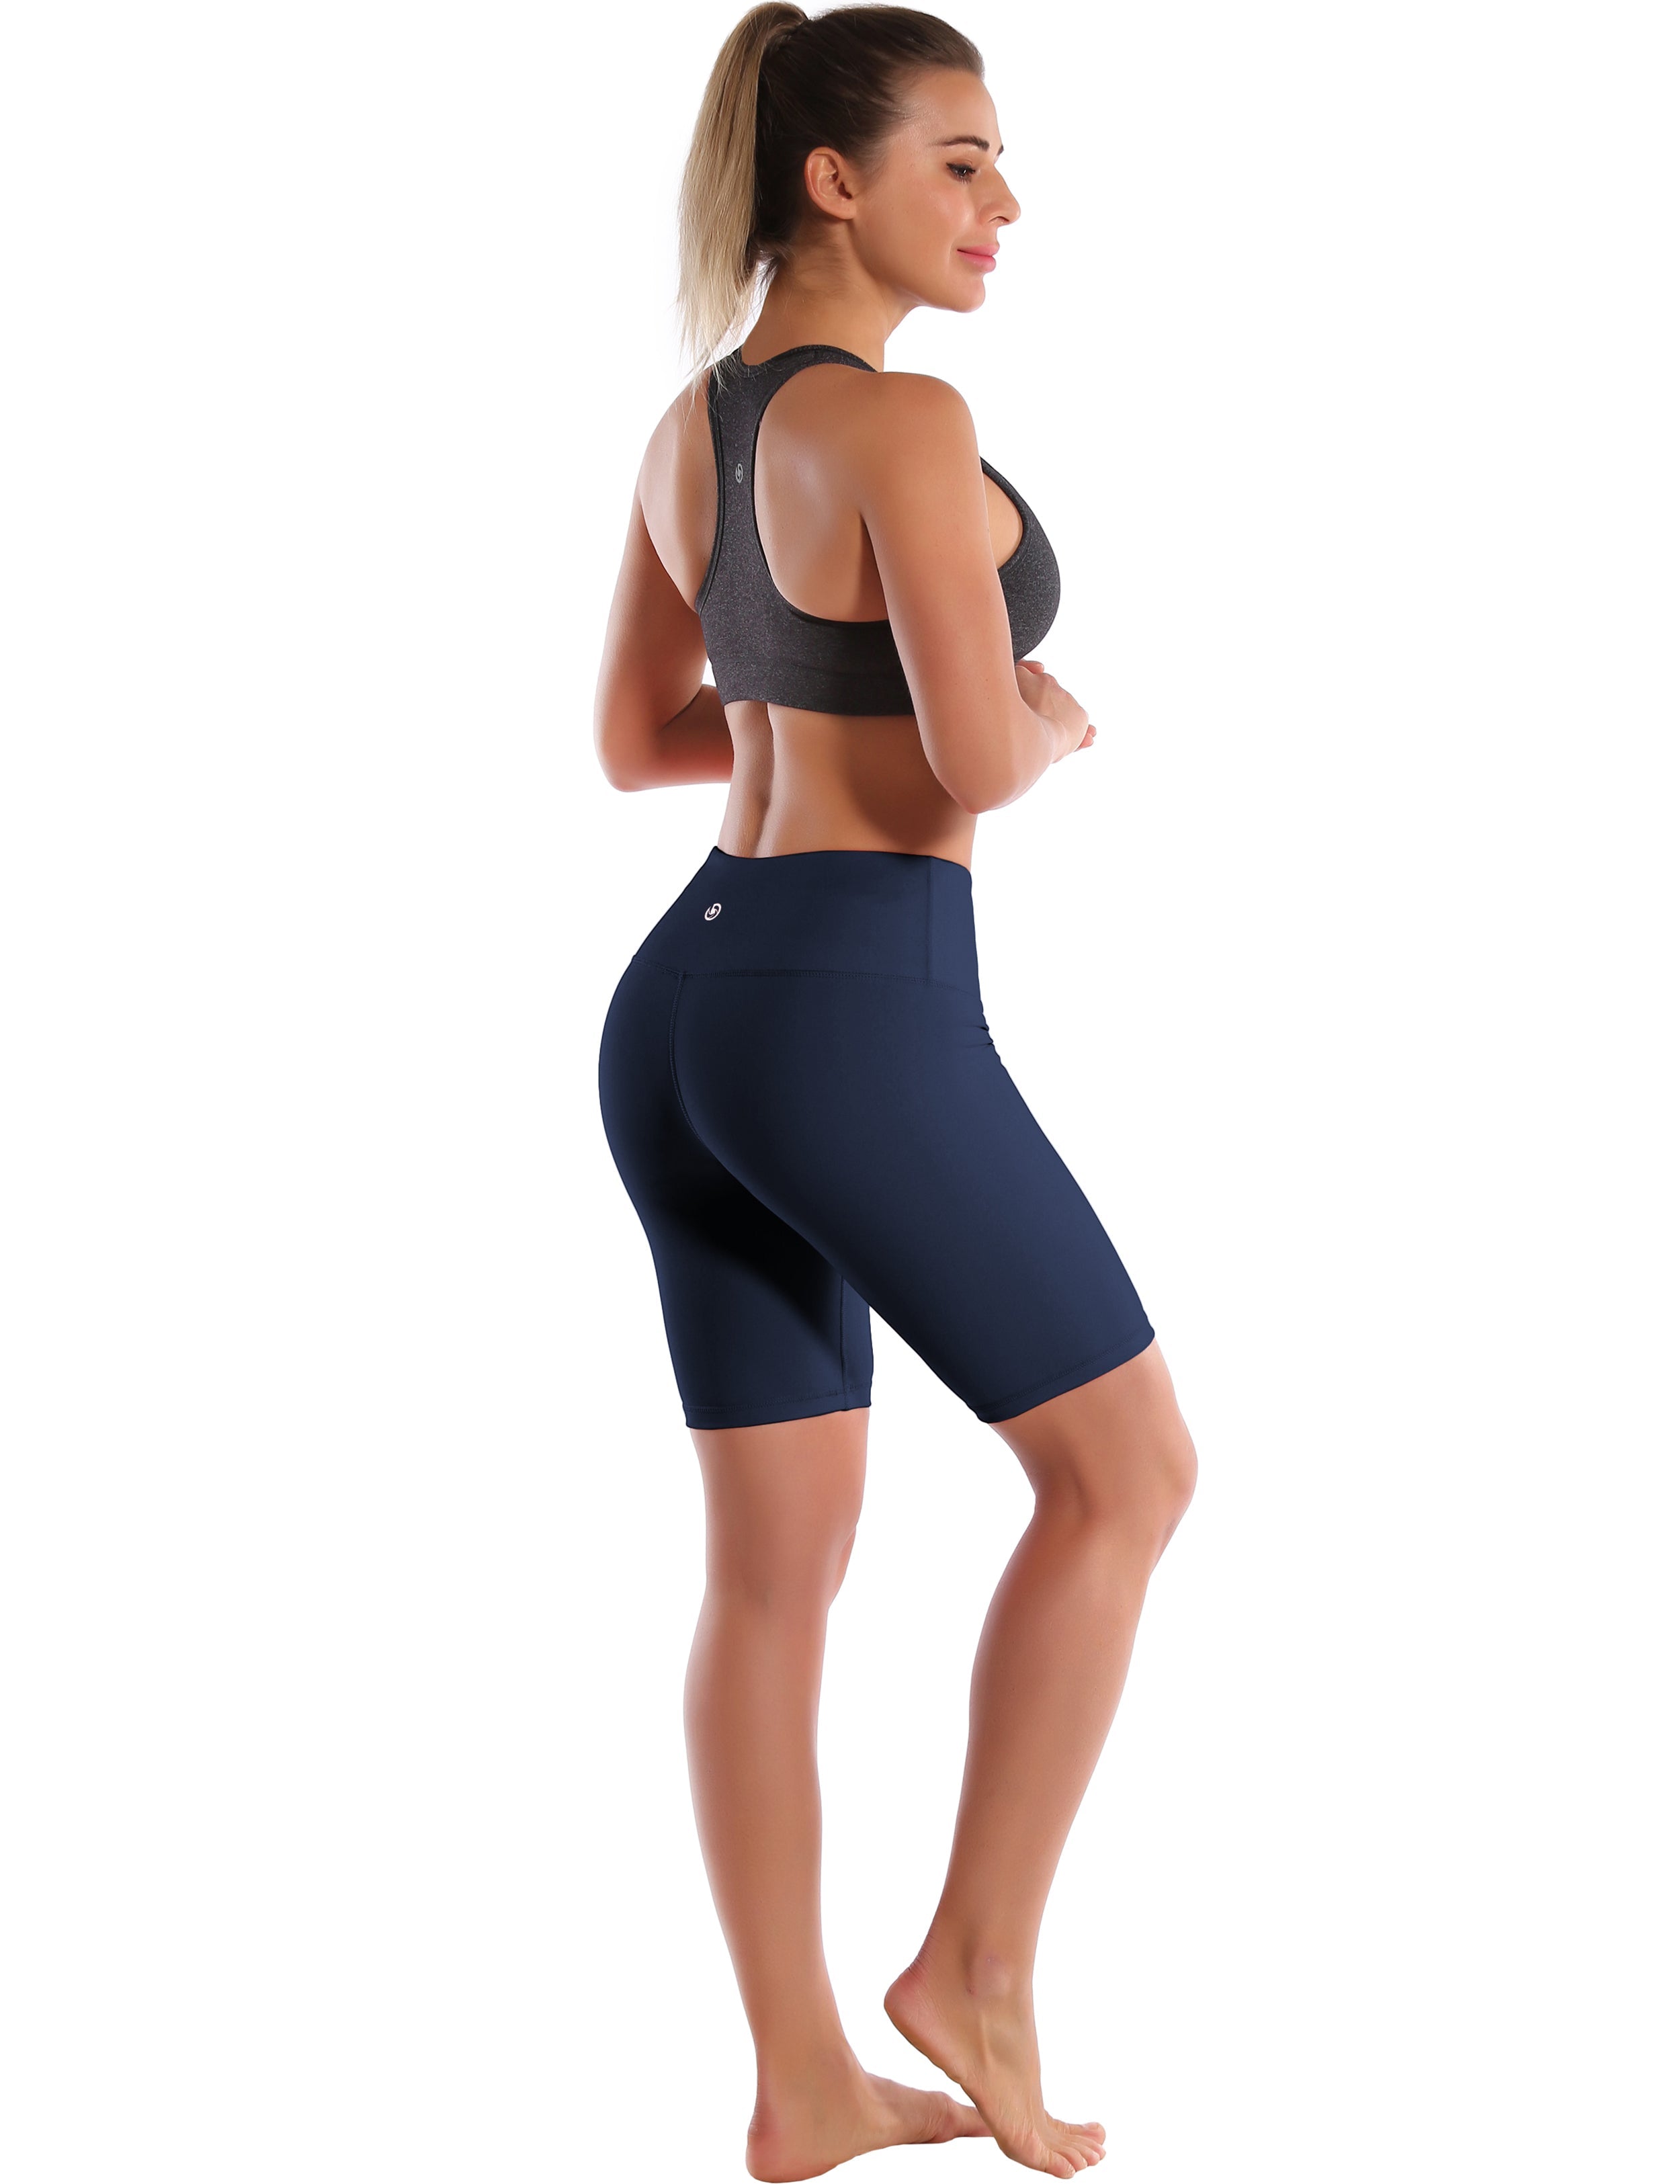 8" High Waist Jogging Shorts darknavy Sleek, soft, smooth and totally comfortable: our newest style is here. Softest-ever fabric High elasticity High density 4-way stretch Fabric doesn't attract lint easily No see-through Moisture-wicking Machine wash 75% Nylon, 25% Spandex